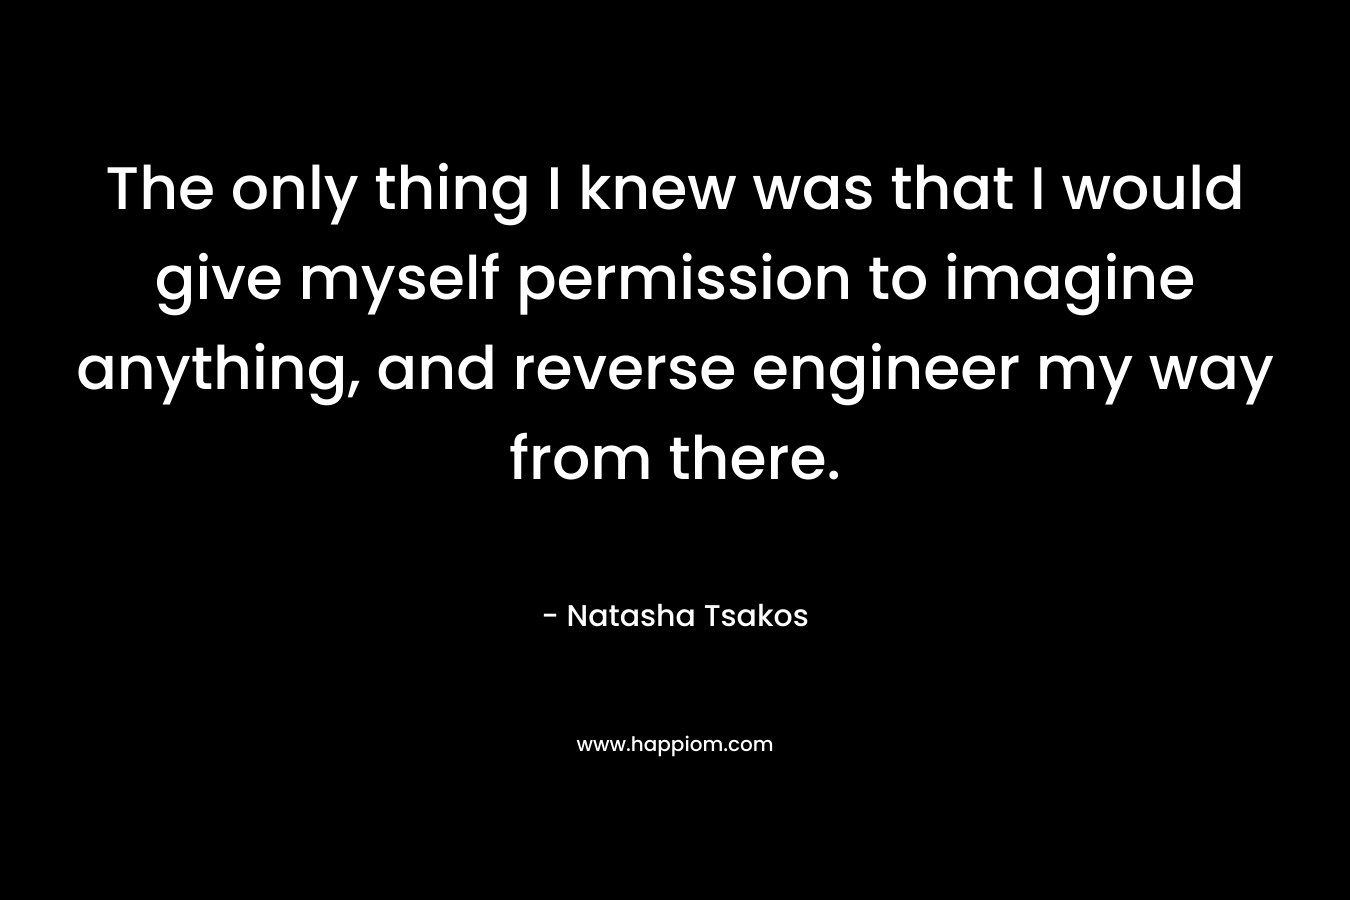 The only thing I knew was that I would give myself permission to imagine anything, and reverse engineer my way from there.